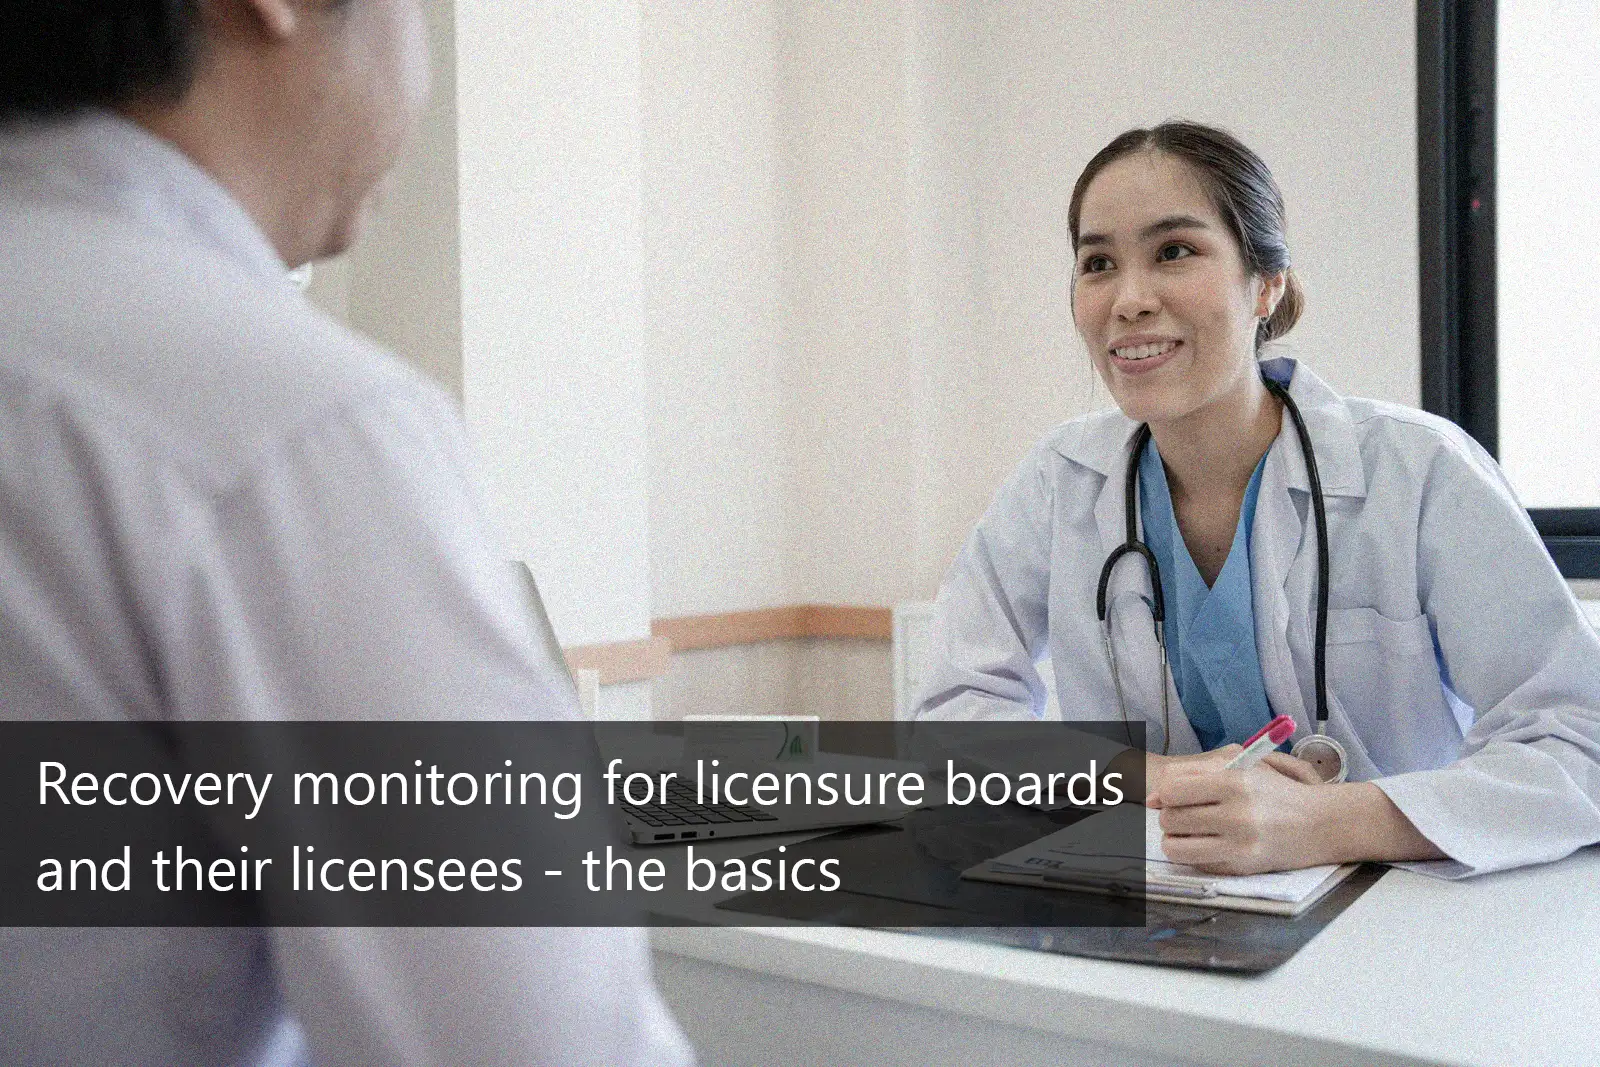 Basics of Recovery Monitoring for Licensure Boards and Licensees